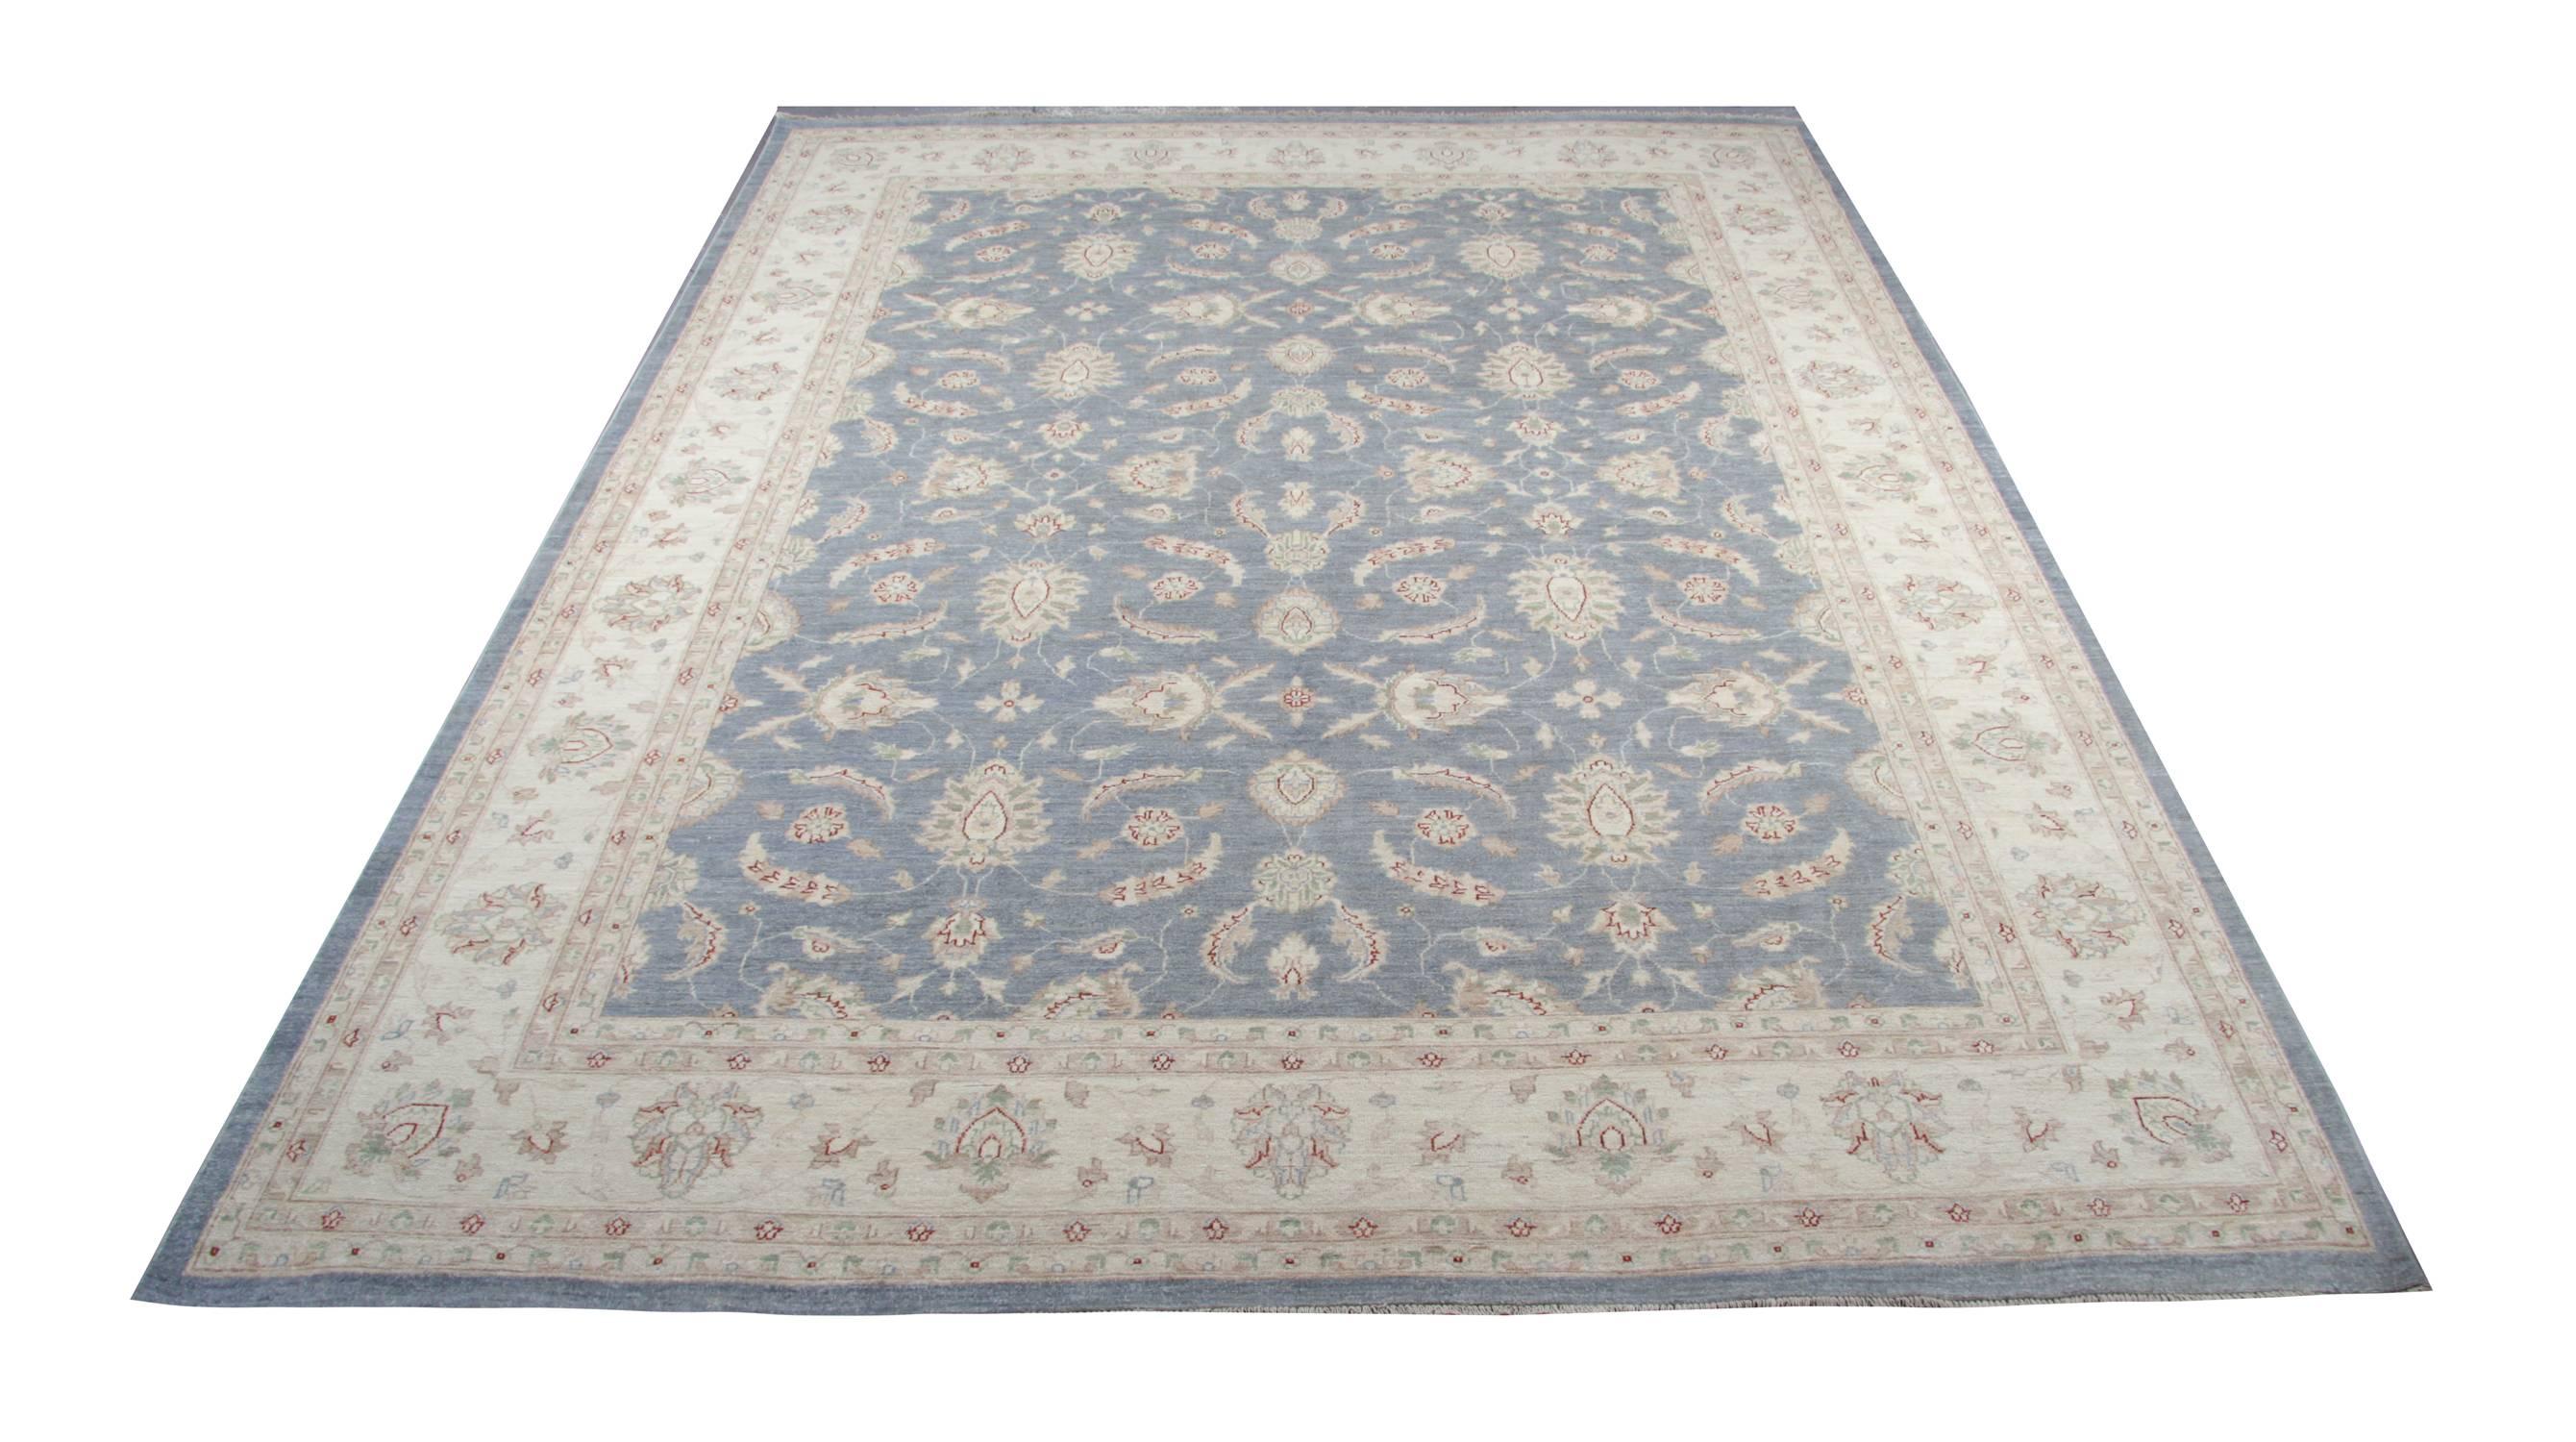 This is traditional rugs kind of our luxury rugs made of own looms by our master weavers of Afghan rugs, This grey rug is made with organic vegetable dyes all handspun wool rugs. This carpet rug is kind of patterned rugs all-over floral rugs design